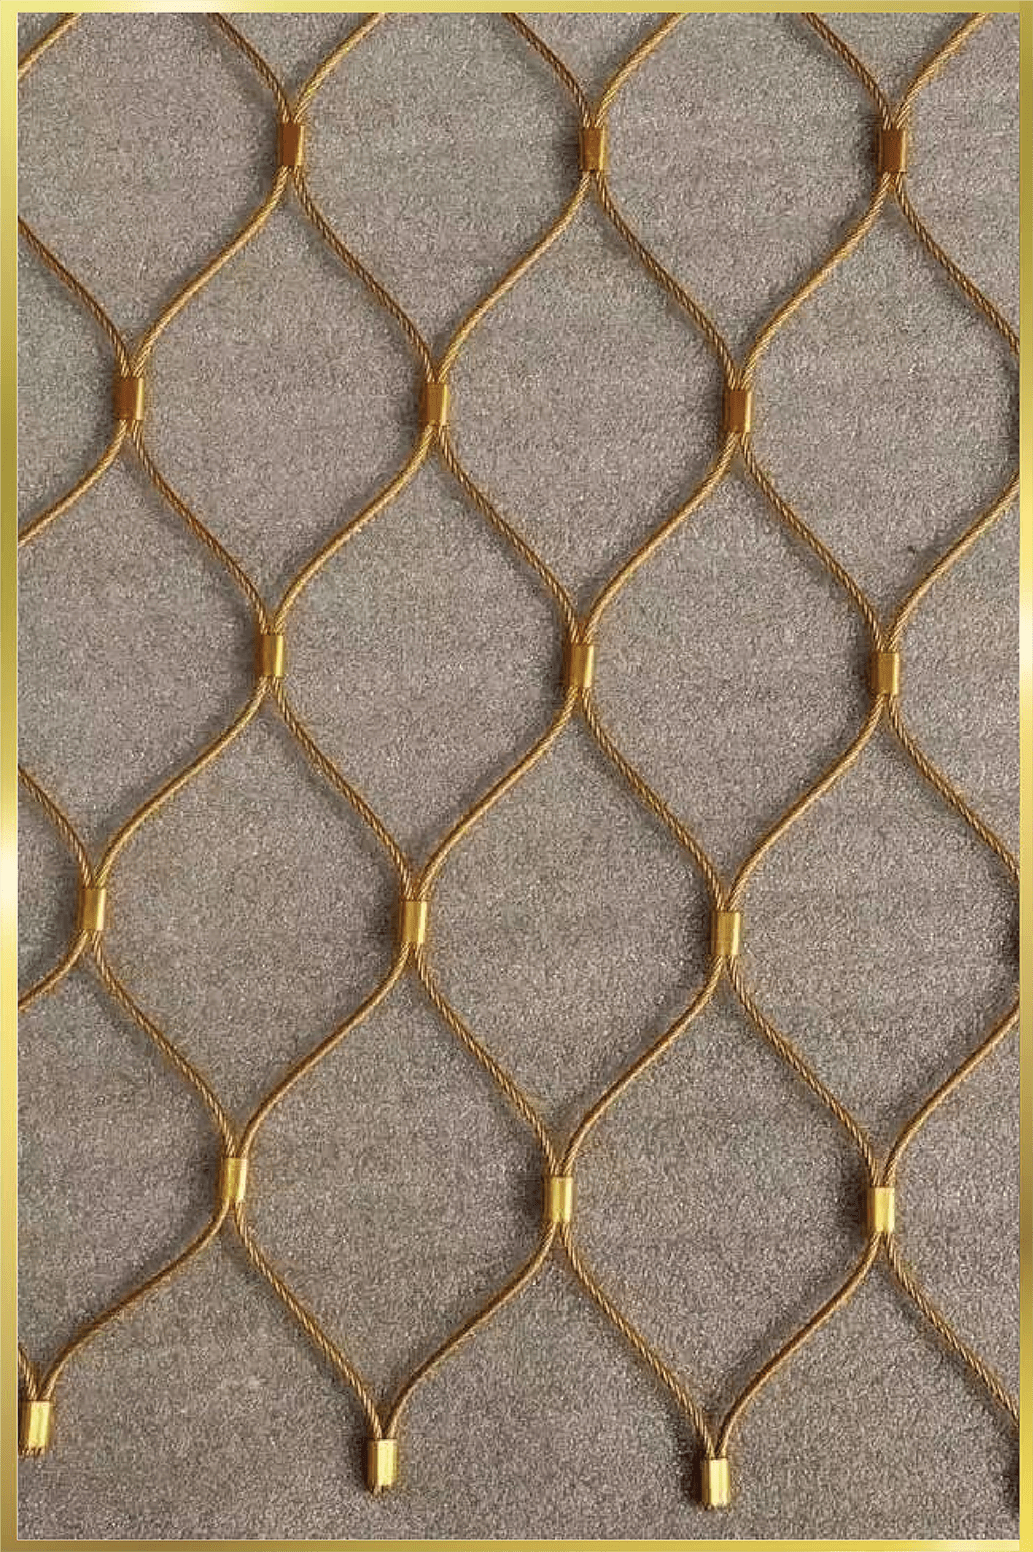 Wire Mesh for Cages